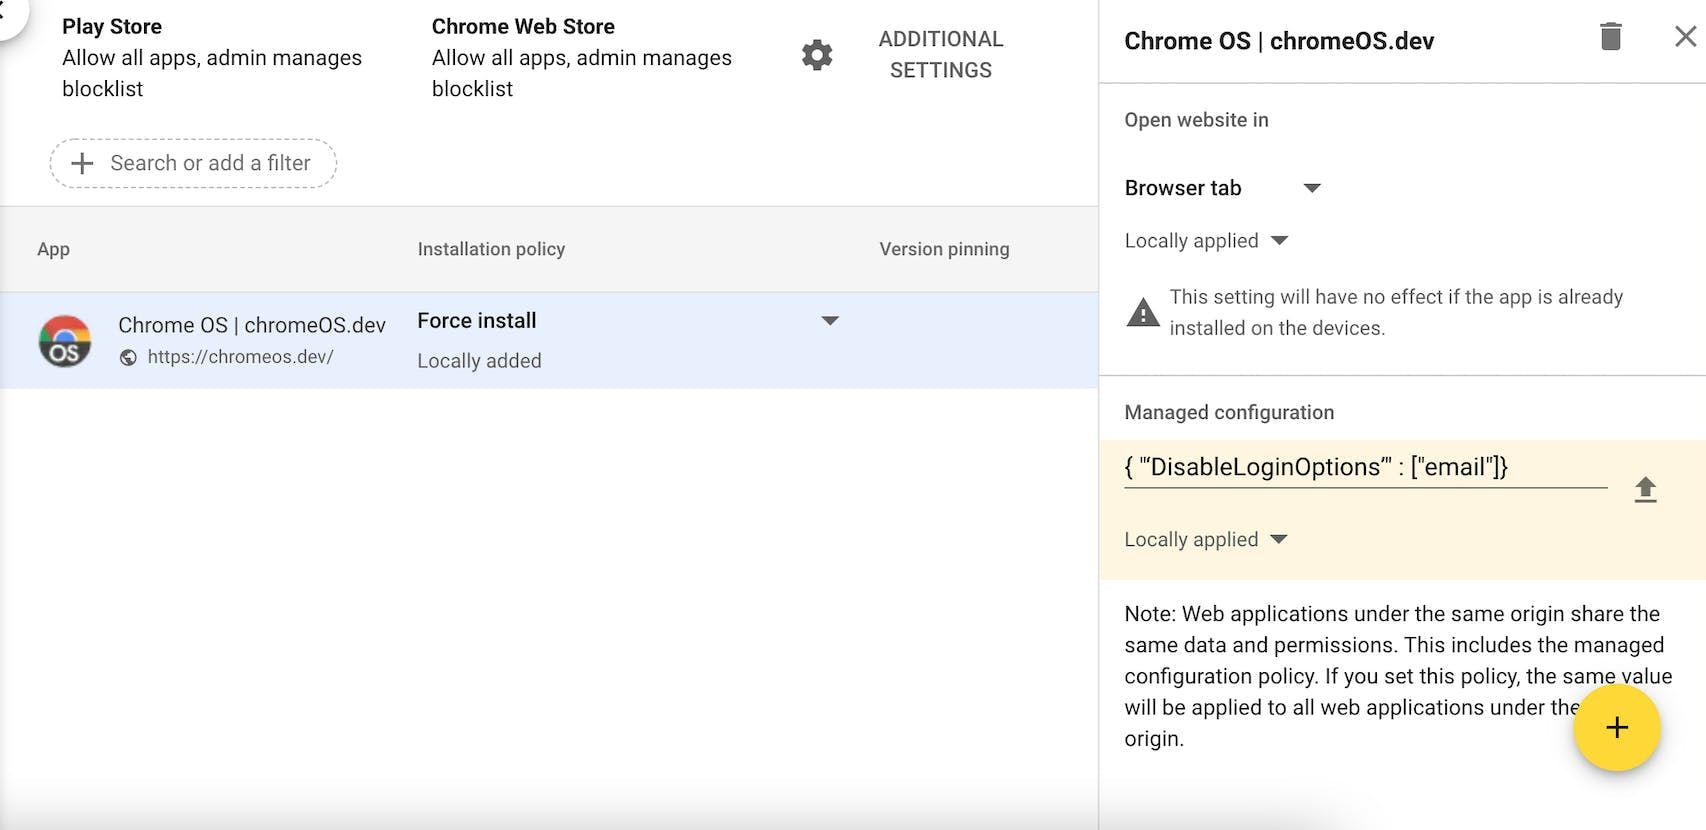 The Google Admin Console UI to insert managed config fields